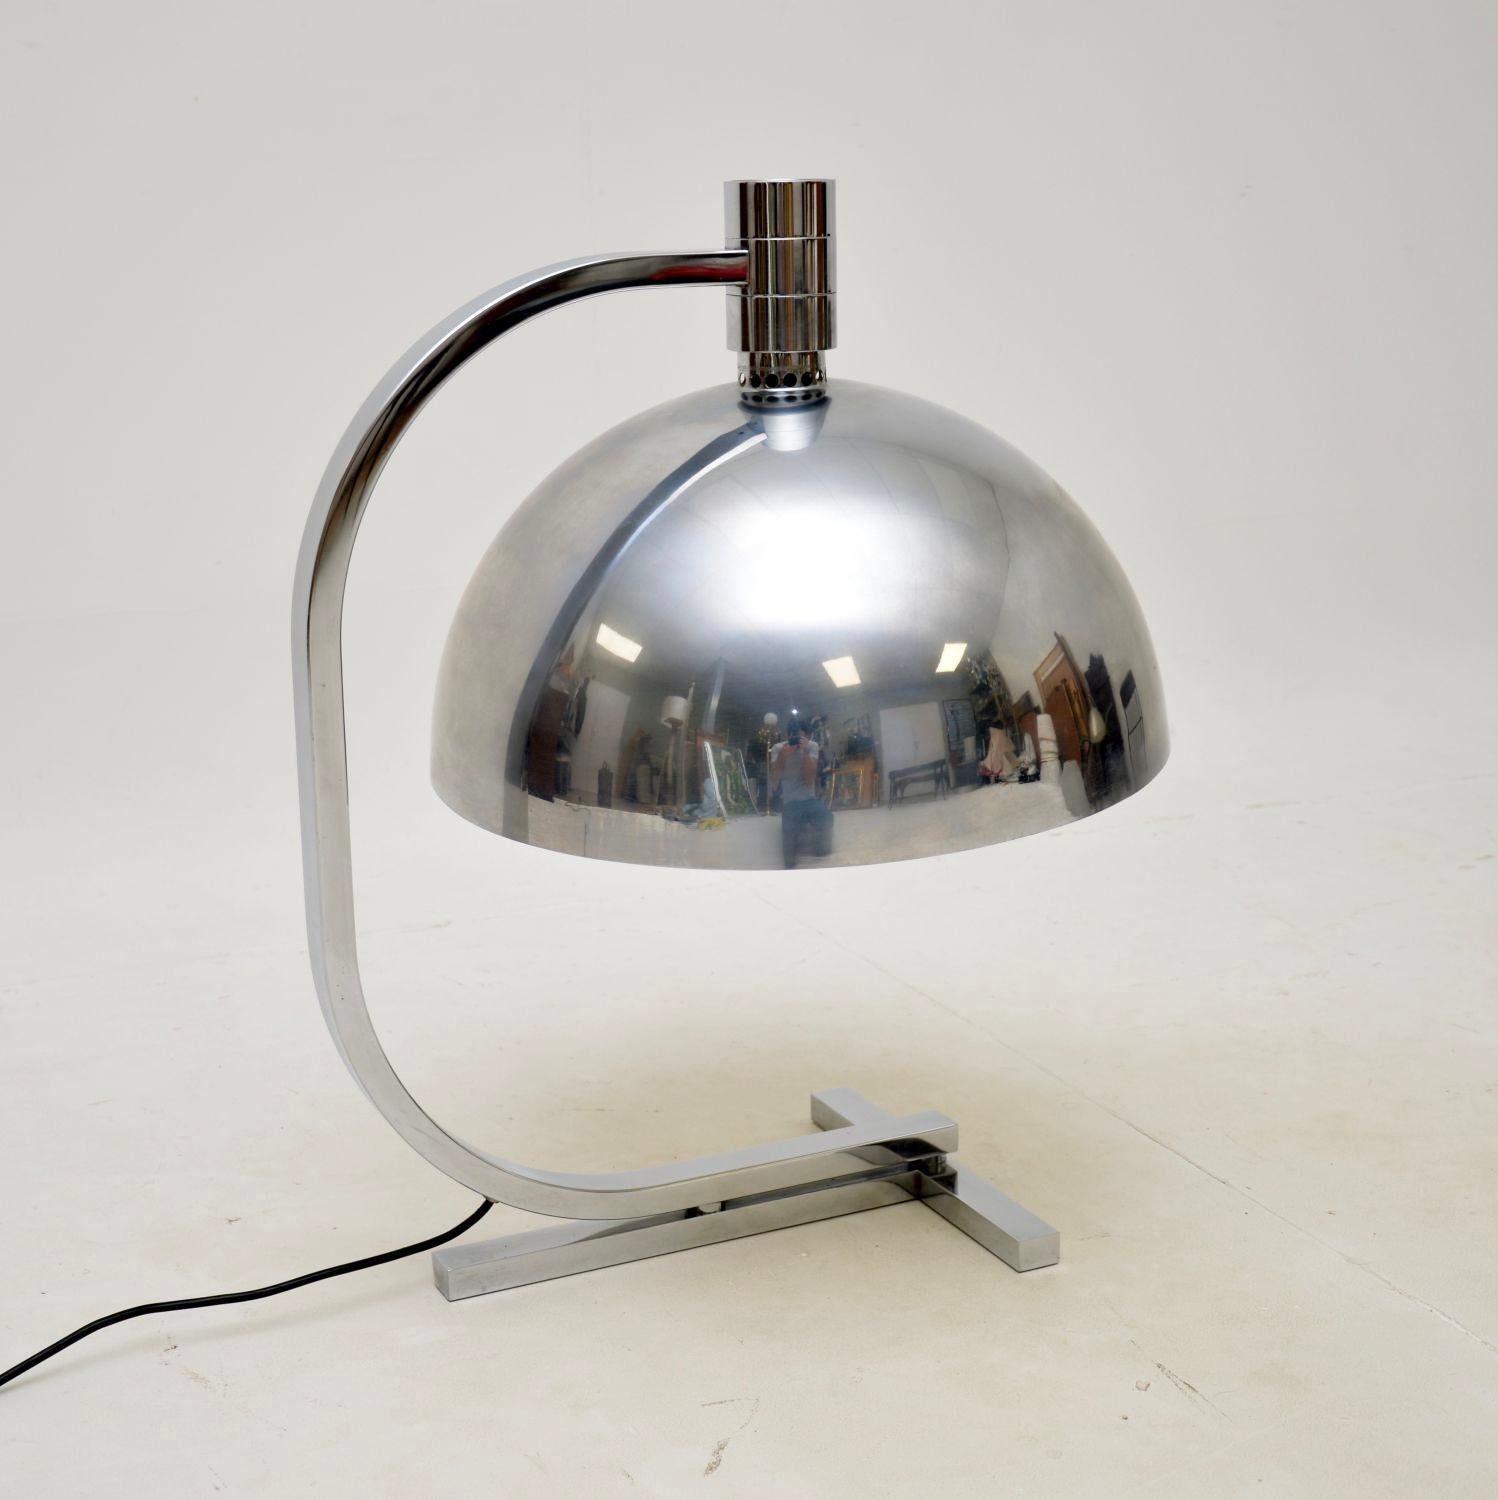 A stunning and very large vintage Italian chrome table lamp by Franco Albini and Franca Helg. This was manufactured in Italy by Sirrah, it dates from the 1970’s.

This is the very rare large model with a huge chrome shade, they are more commonly